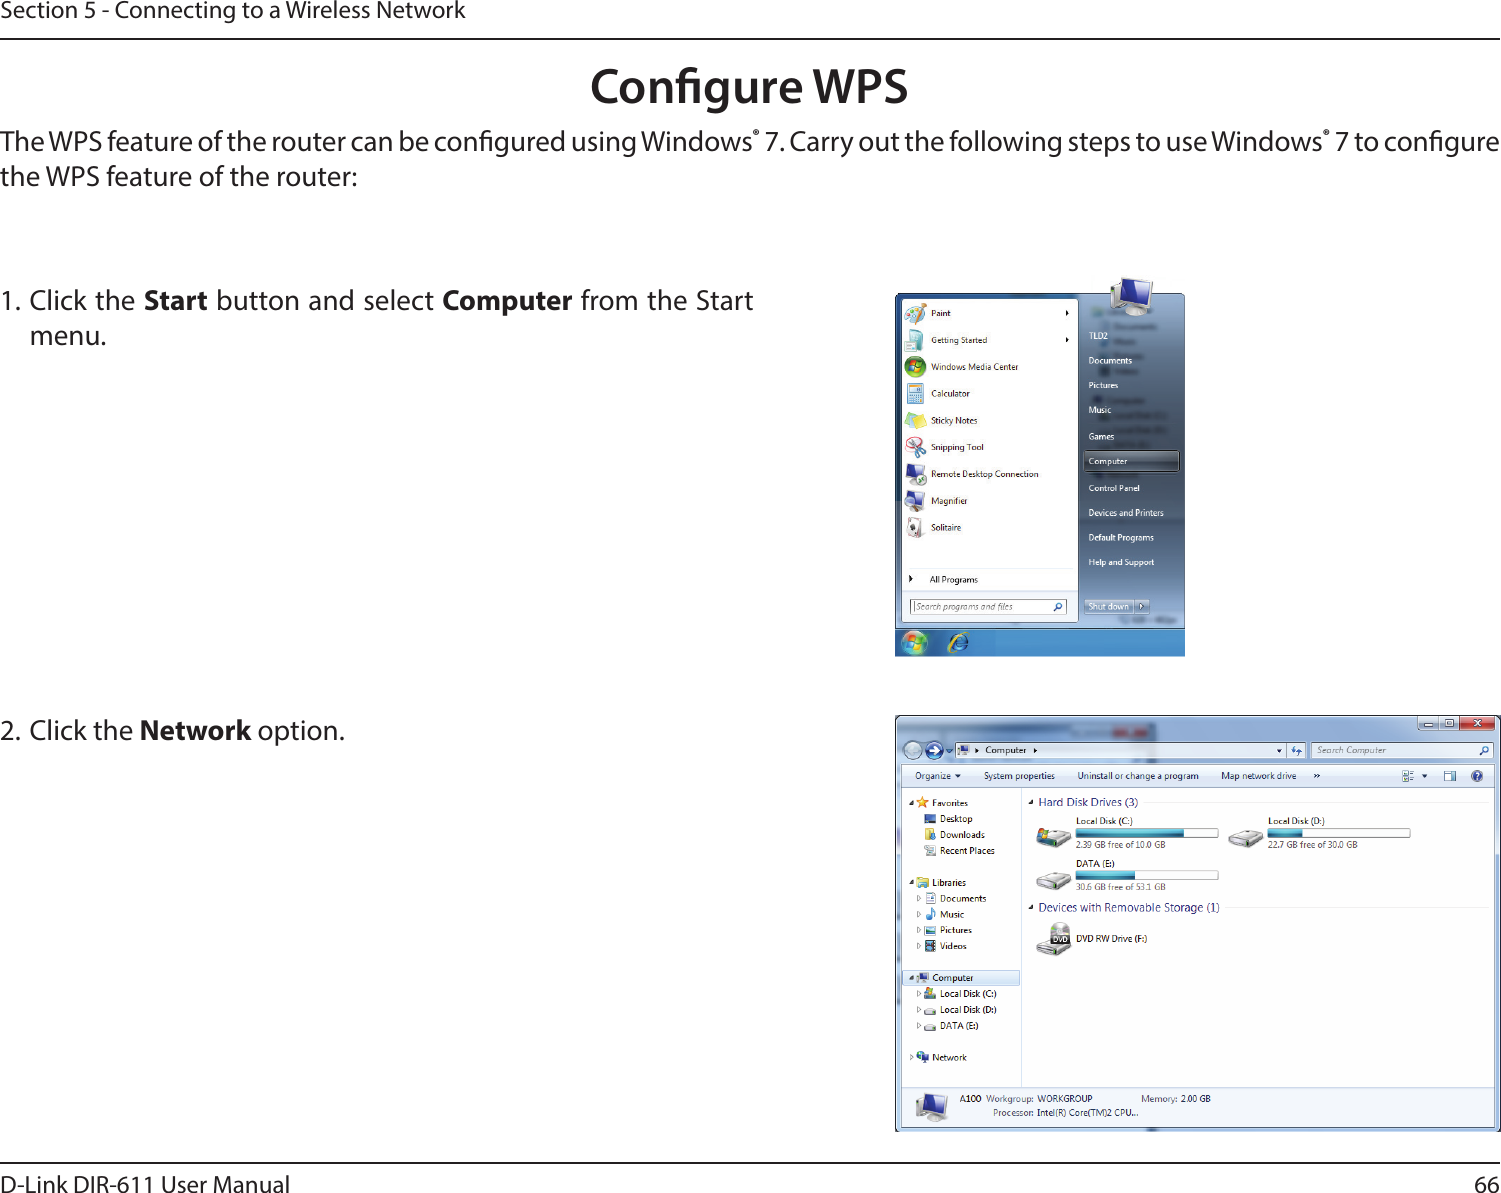 66D-Link DIR-611 User ManualSection 5 - Connecting to a Wireless NetworkCongure WPSThe WPS feature of the router can be congured using Windows® 7. Carry out the following steps to use Windows® 7 to congure the WPS feature of the router:1. Click the Start button and select Computer from the Start menu.2. Click the Network option.